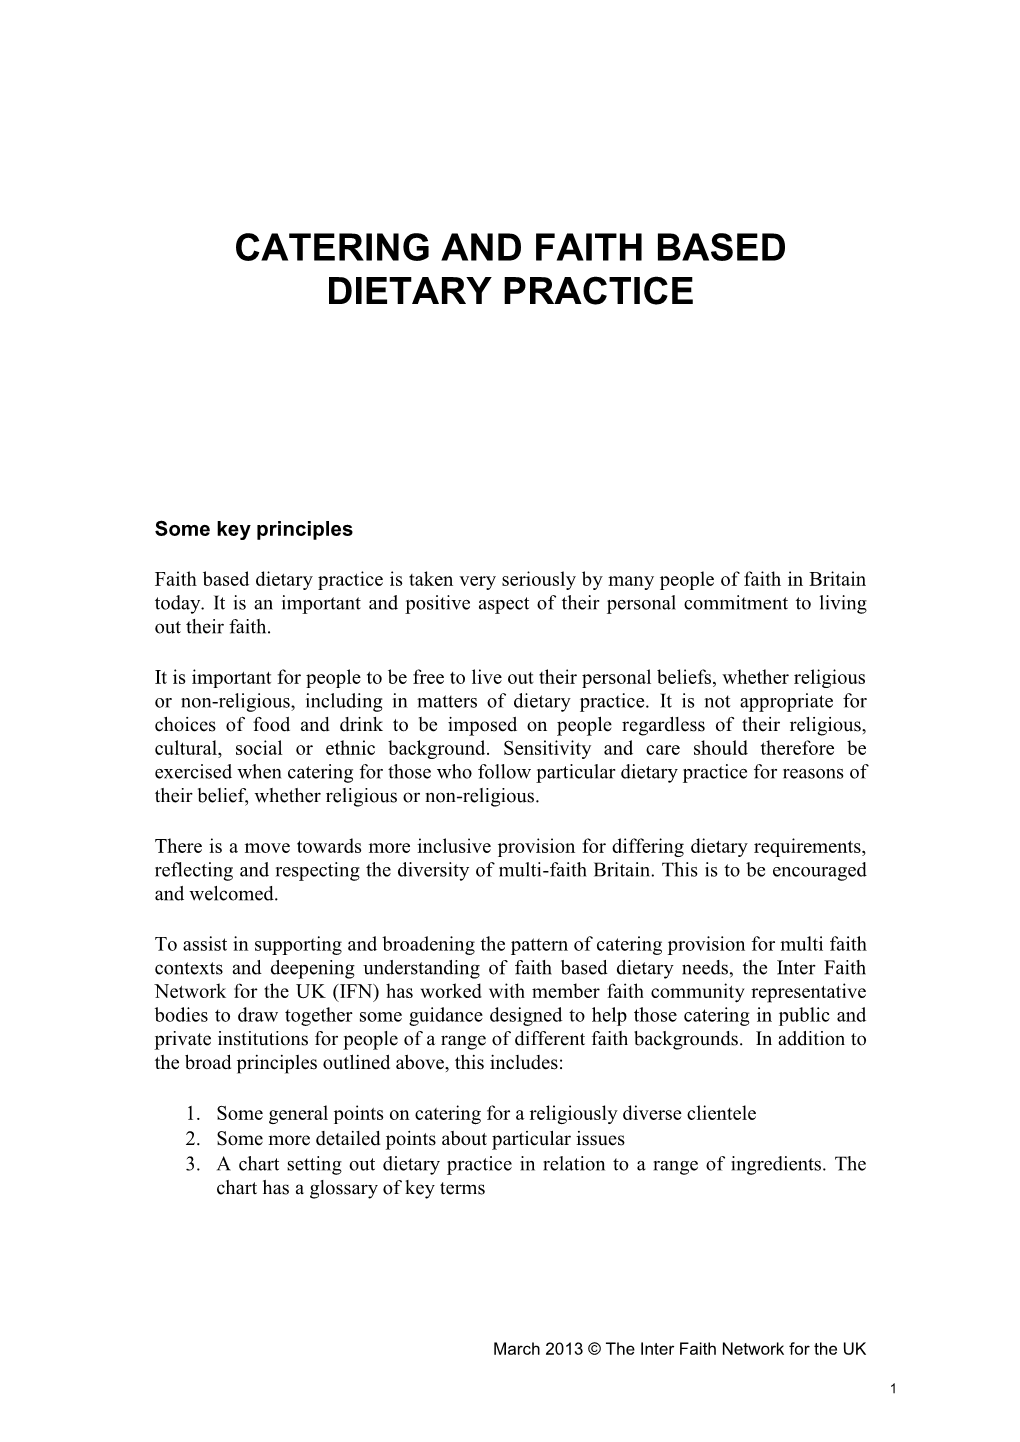 Catering and Faith Based Dietary Practice